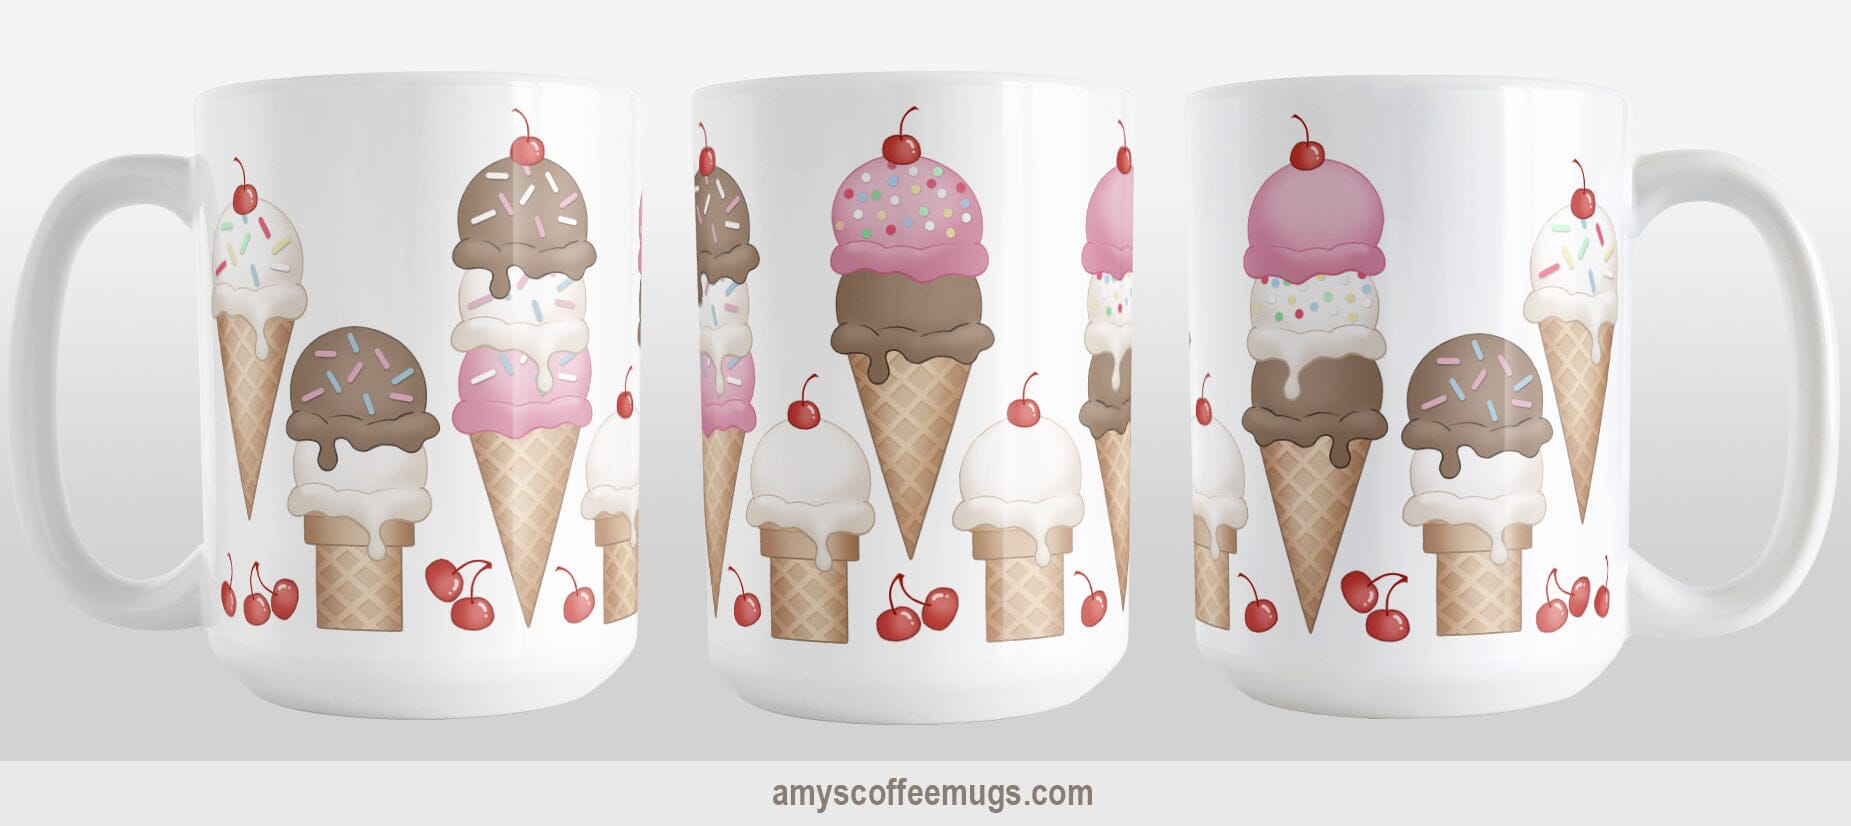 Ice Cream Cones and Cherries Mug (15oz) at Amy's Coffee Mugs. A ceramic coffee mug designed with hand-drawn ice cream cones with chocolate, vanilla, and strawberry scoops, sprinkles, and cherries. Image shows 3 views of the design around the mug.